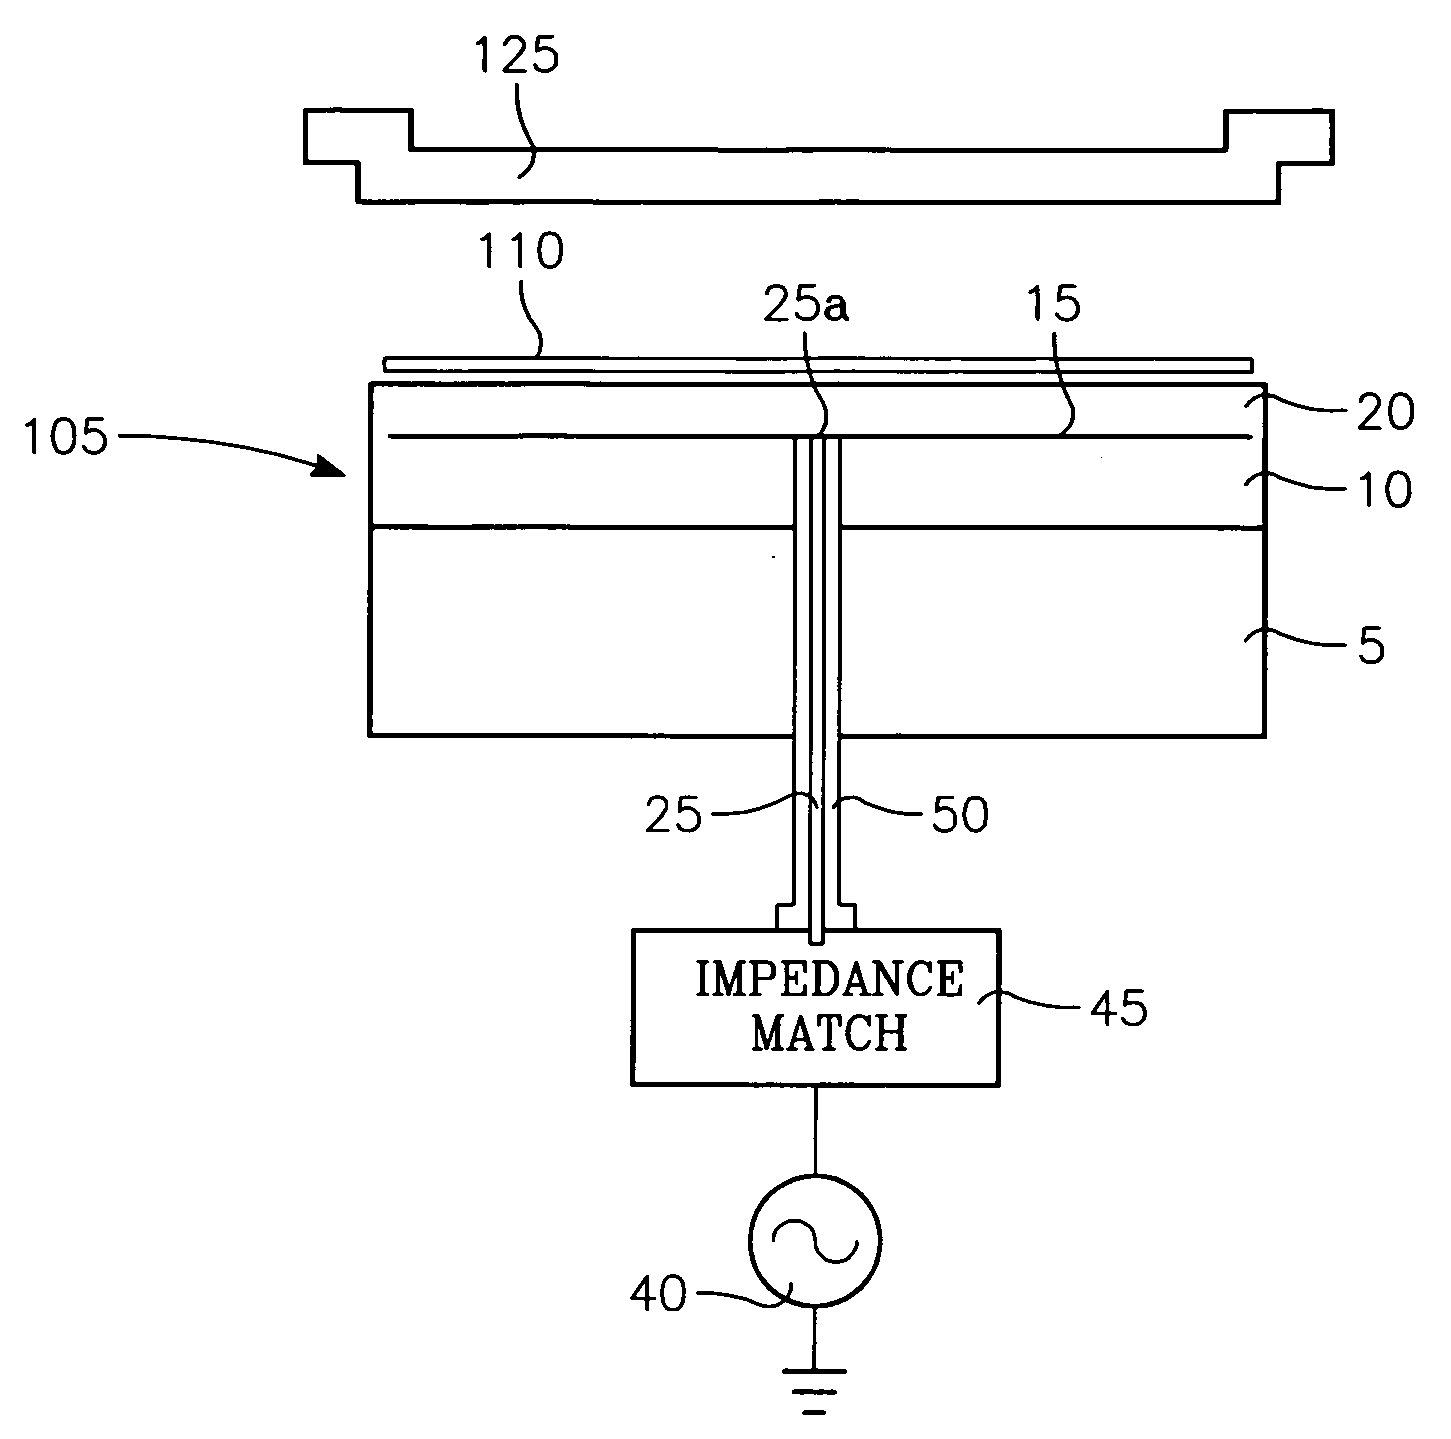 Method of processing a workpiece in a plasma reactor using feed forward thermal control